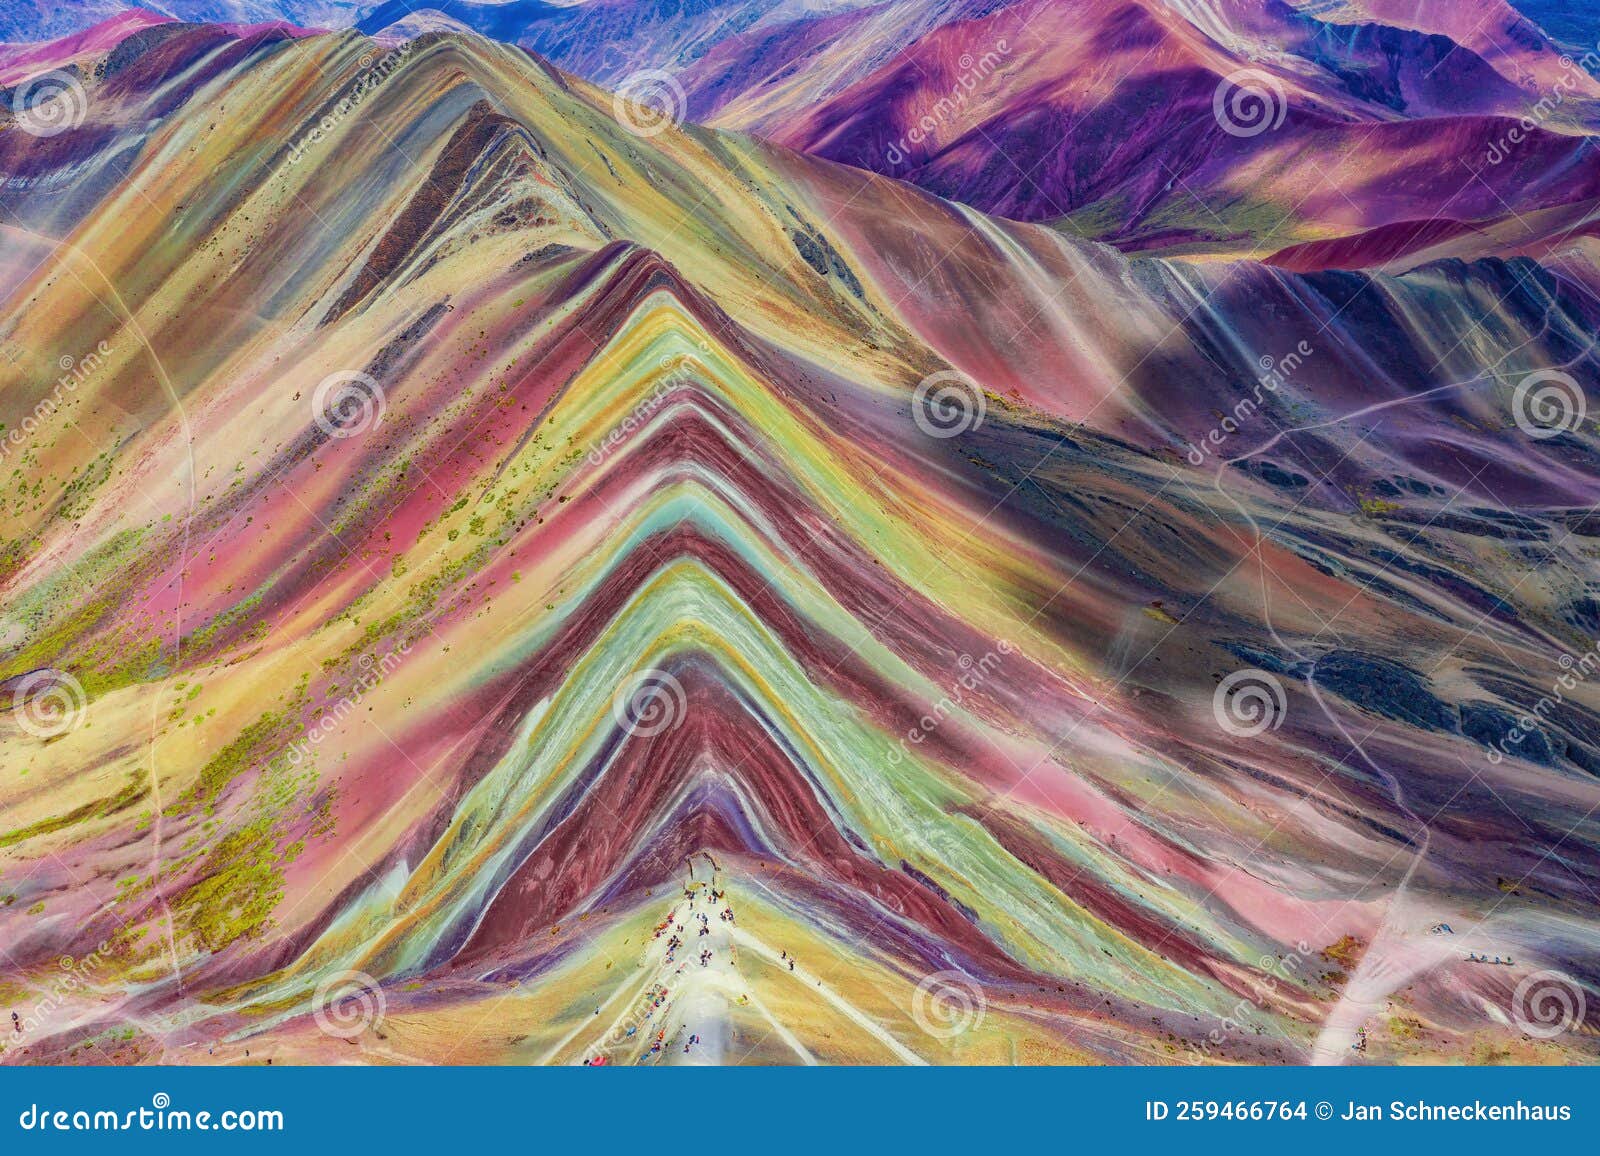 aerial view of the rainbow mountains montana de siete colores in peru with vinicunca in the center